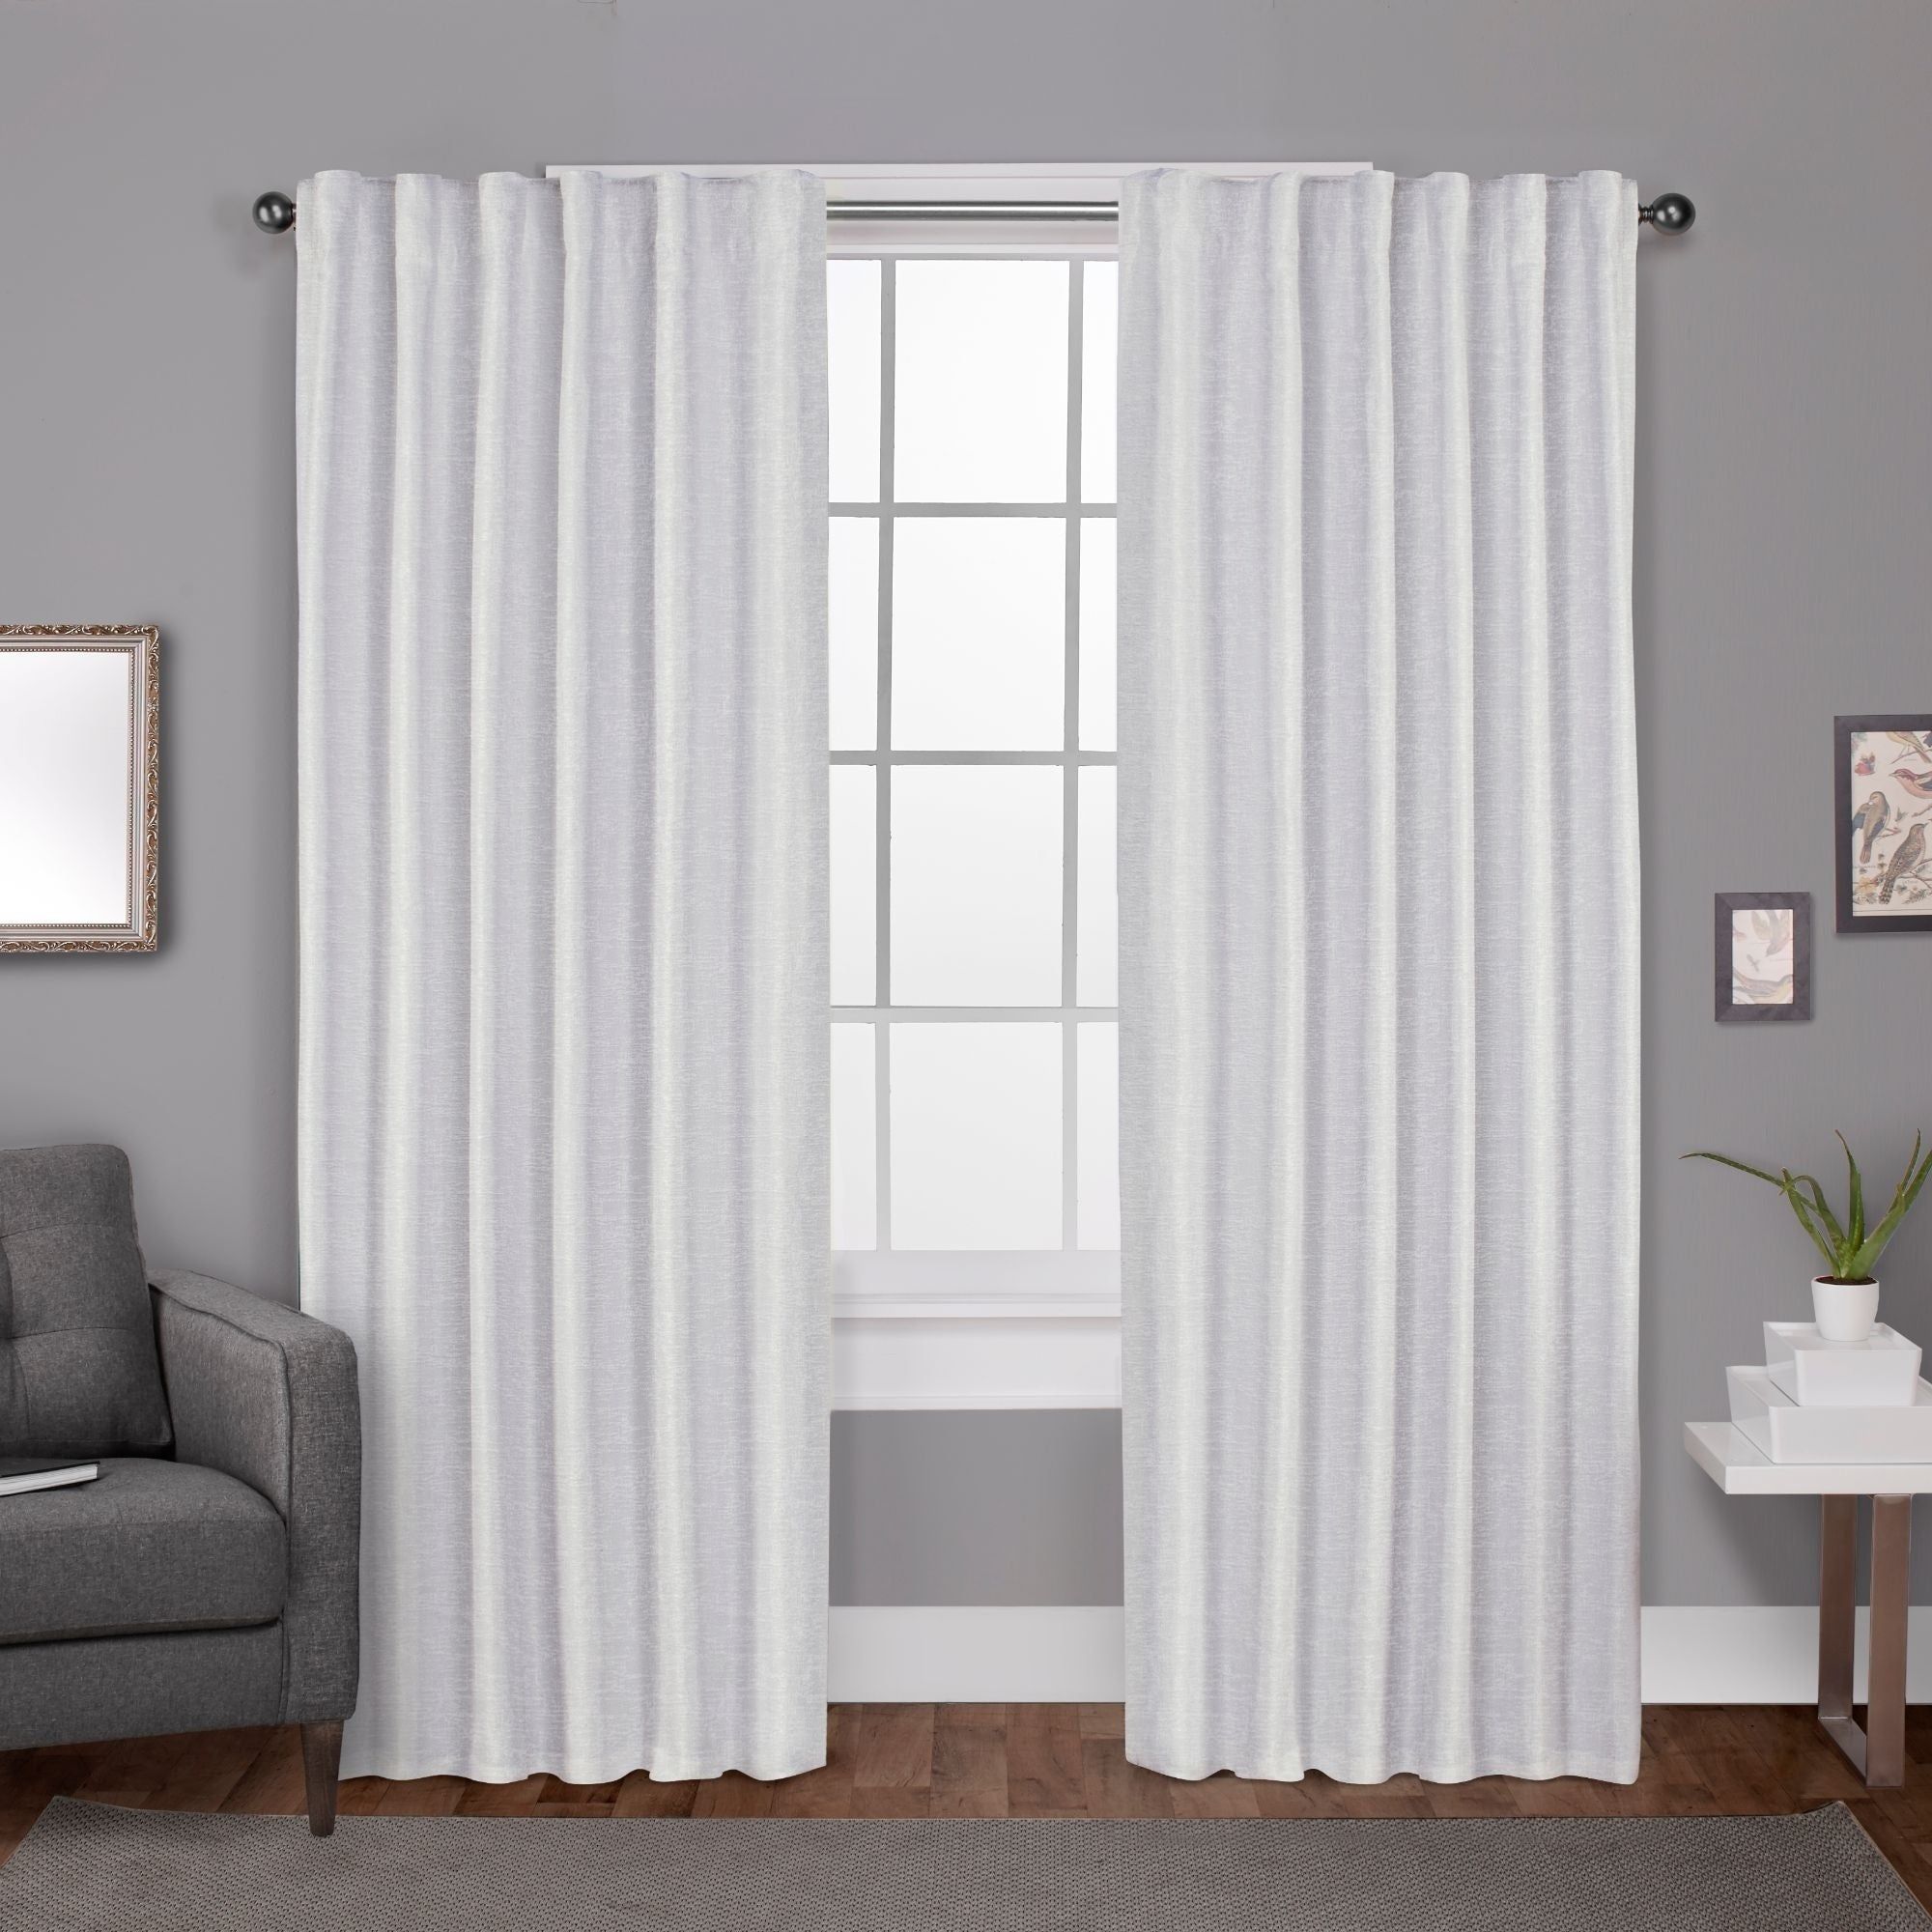 Ati Home Zeus Thermal Woven Blackout Back Tab Top Curtain Panel Pair In Cyrus Thermal Blackout Back Tab Curtain Panels (View 1 of 20)